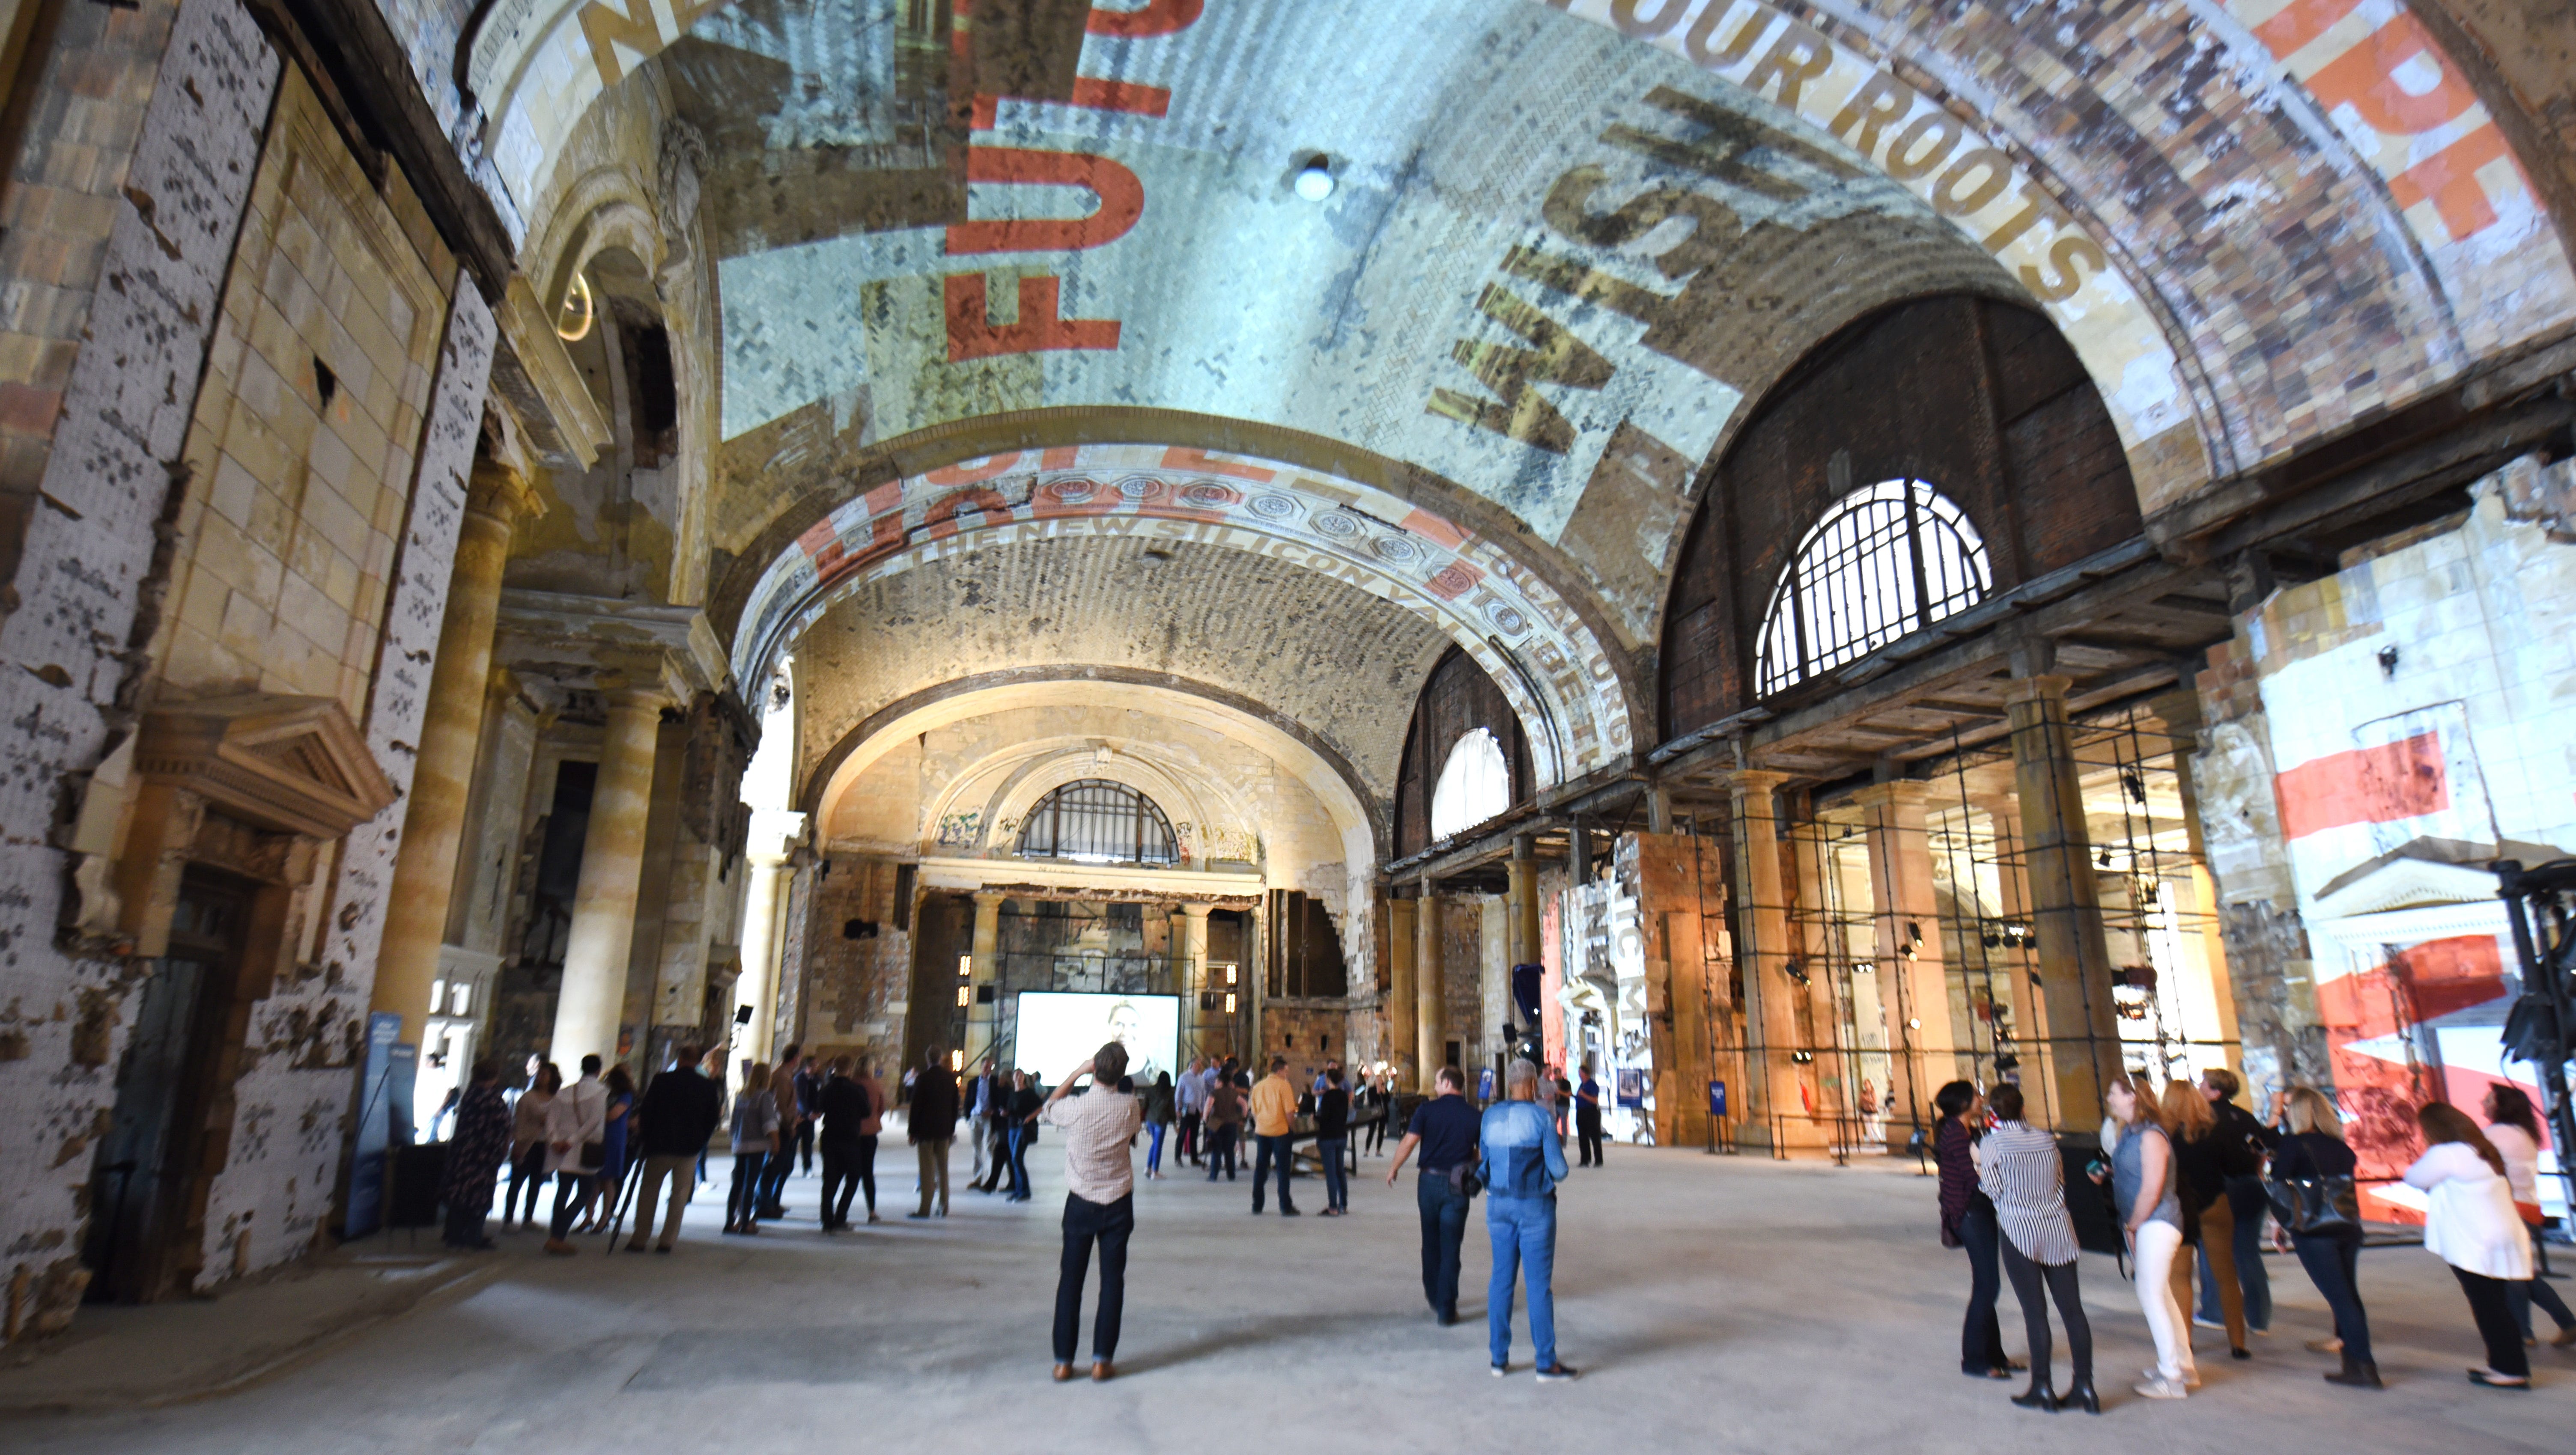 People gather in the grand hall of the Michigan Central Train Depot, where messages are projected on the ceiling.